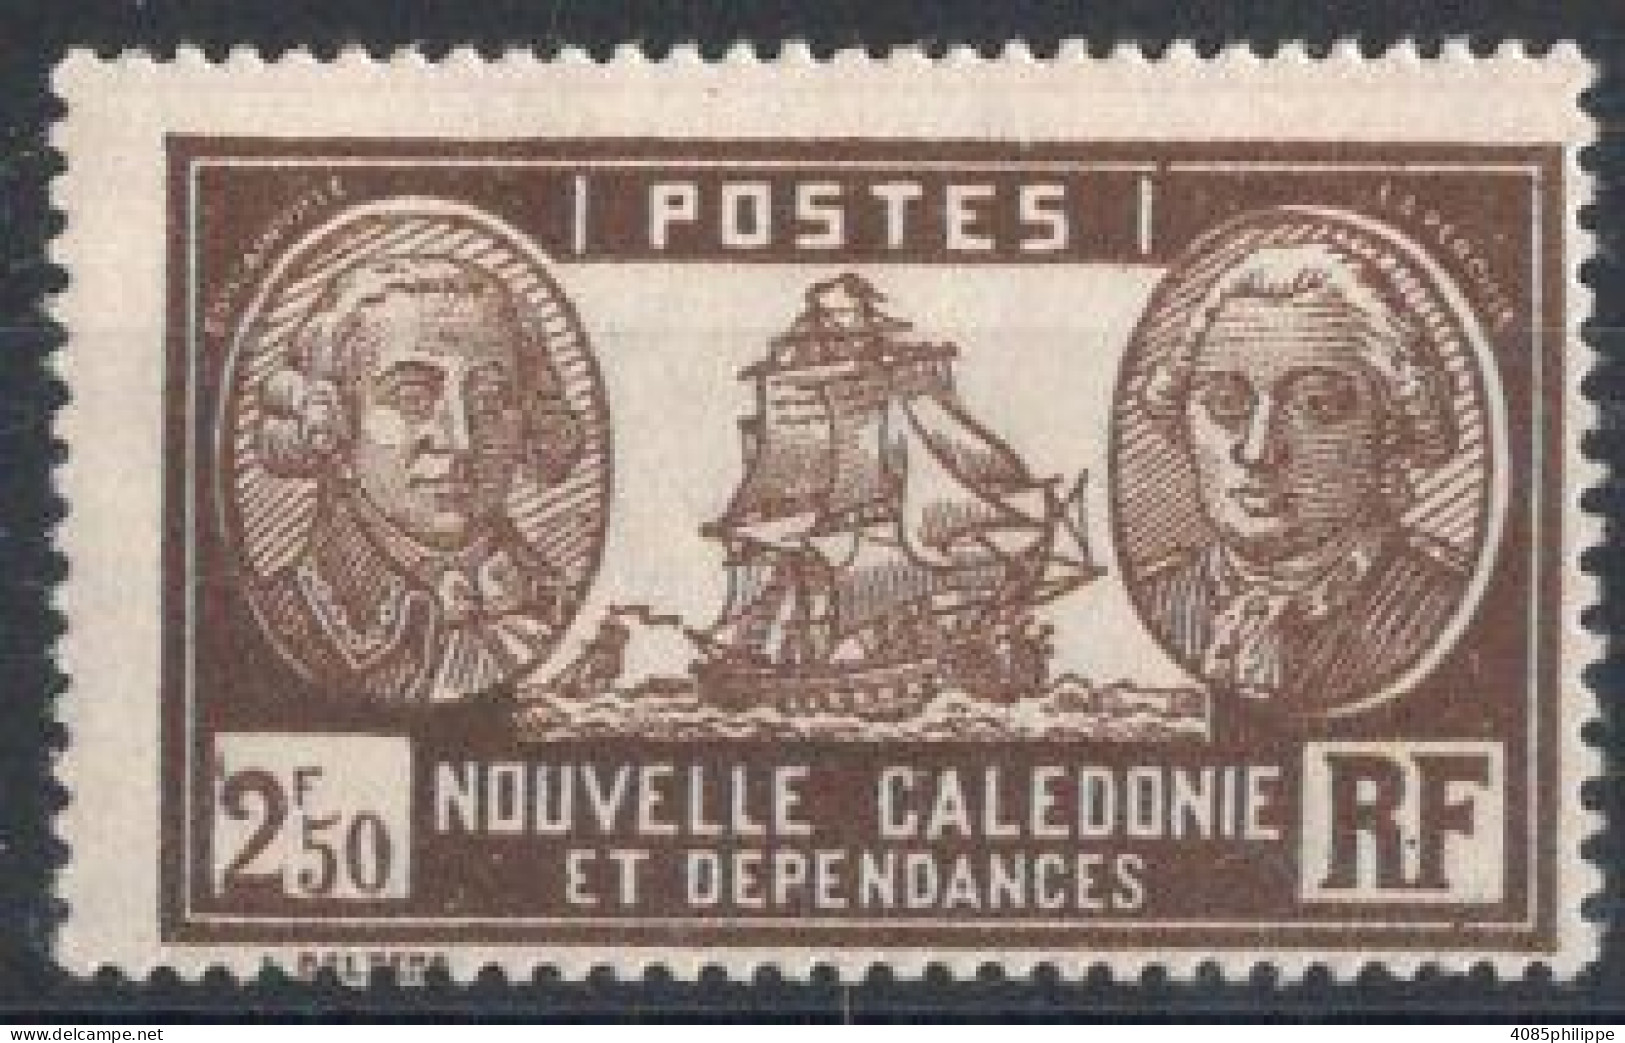 Nvelle CALEDONIE Timbre-Poste N°189** Neuf Sans Charnières TB Cote : 4€00 - Unused Stamps